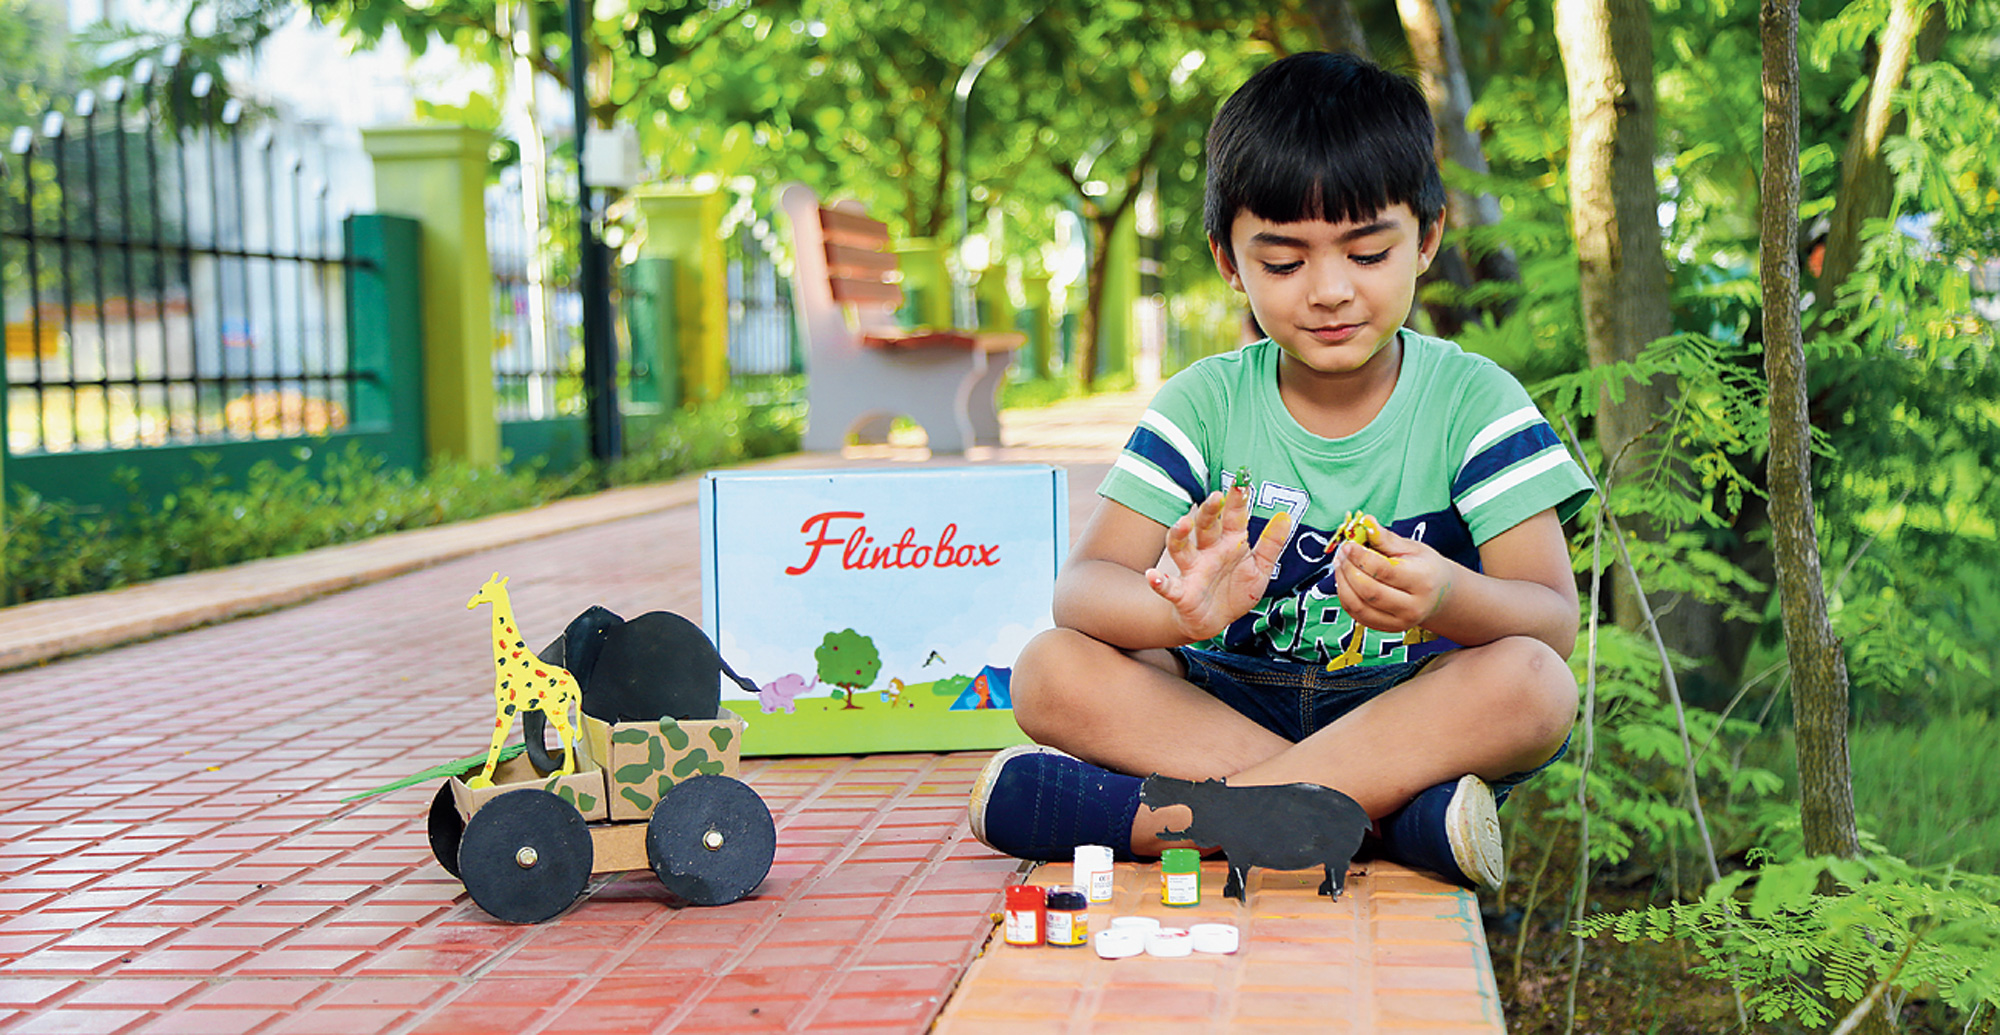 Learning should be fun for children - Telegraph India